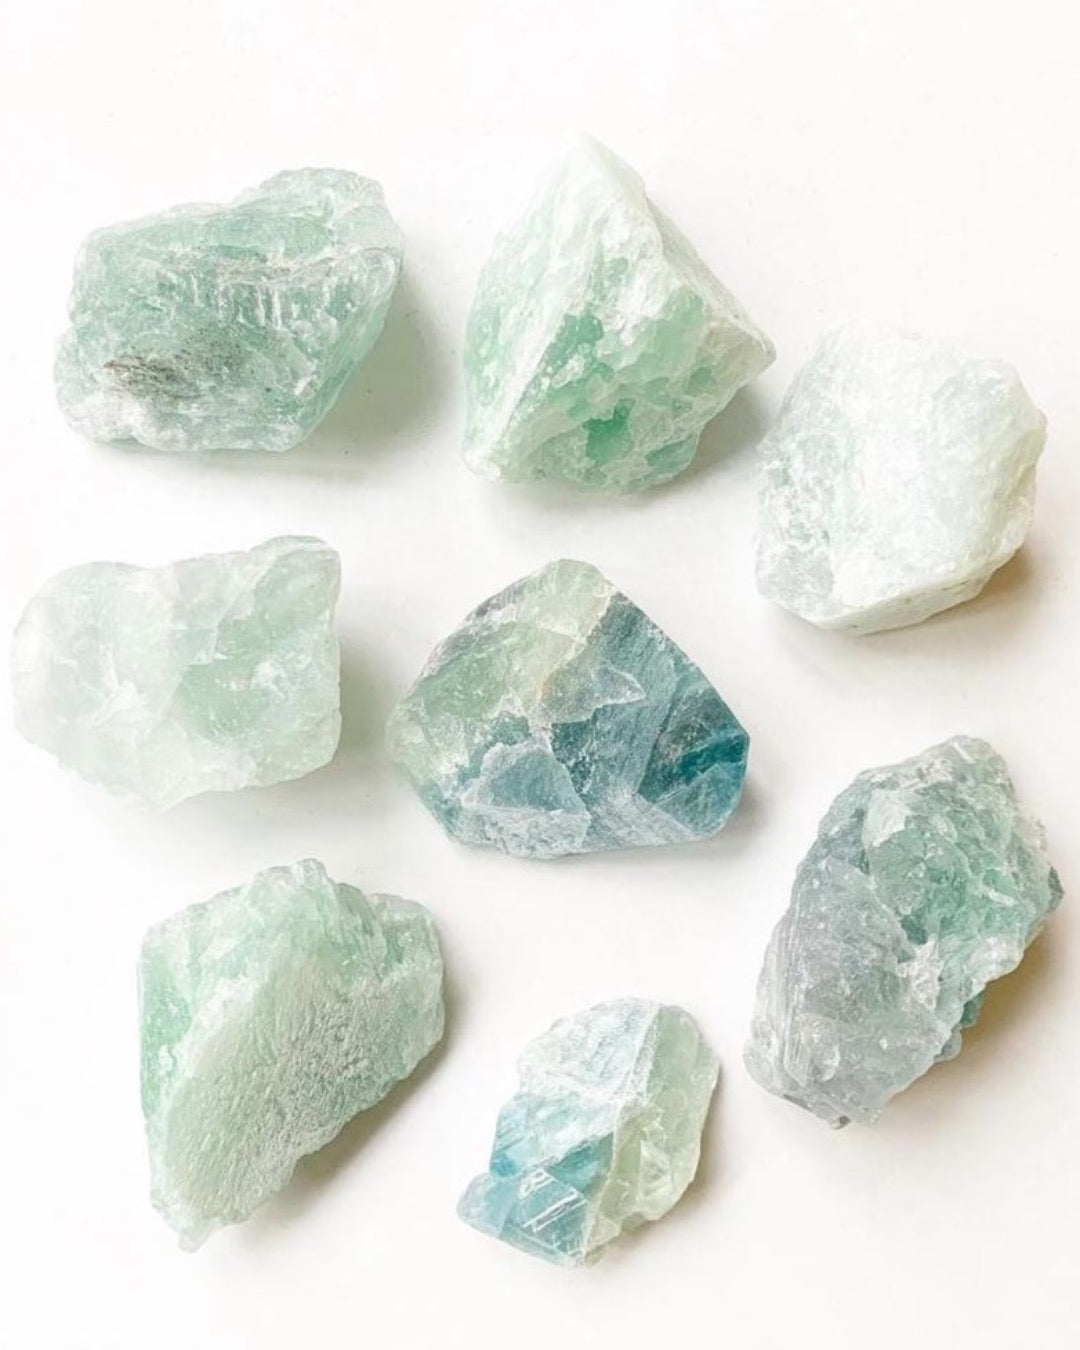 Fluorite Stones - by lbs. - Crystals Shop, Gems + Wholesale Sage by Liv Rocks